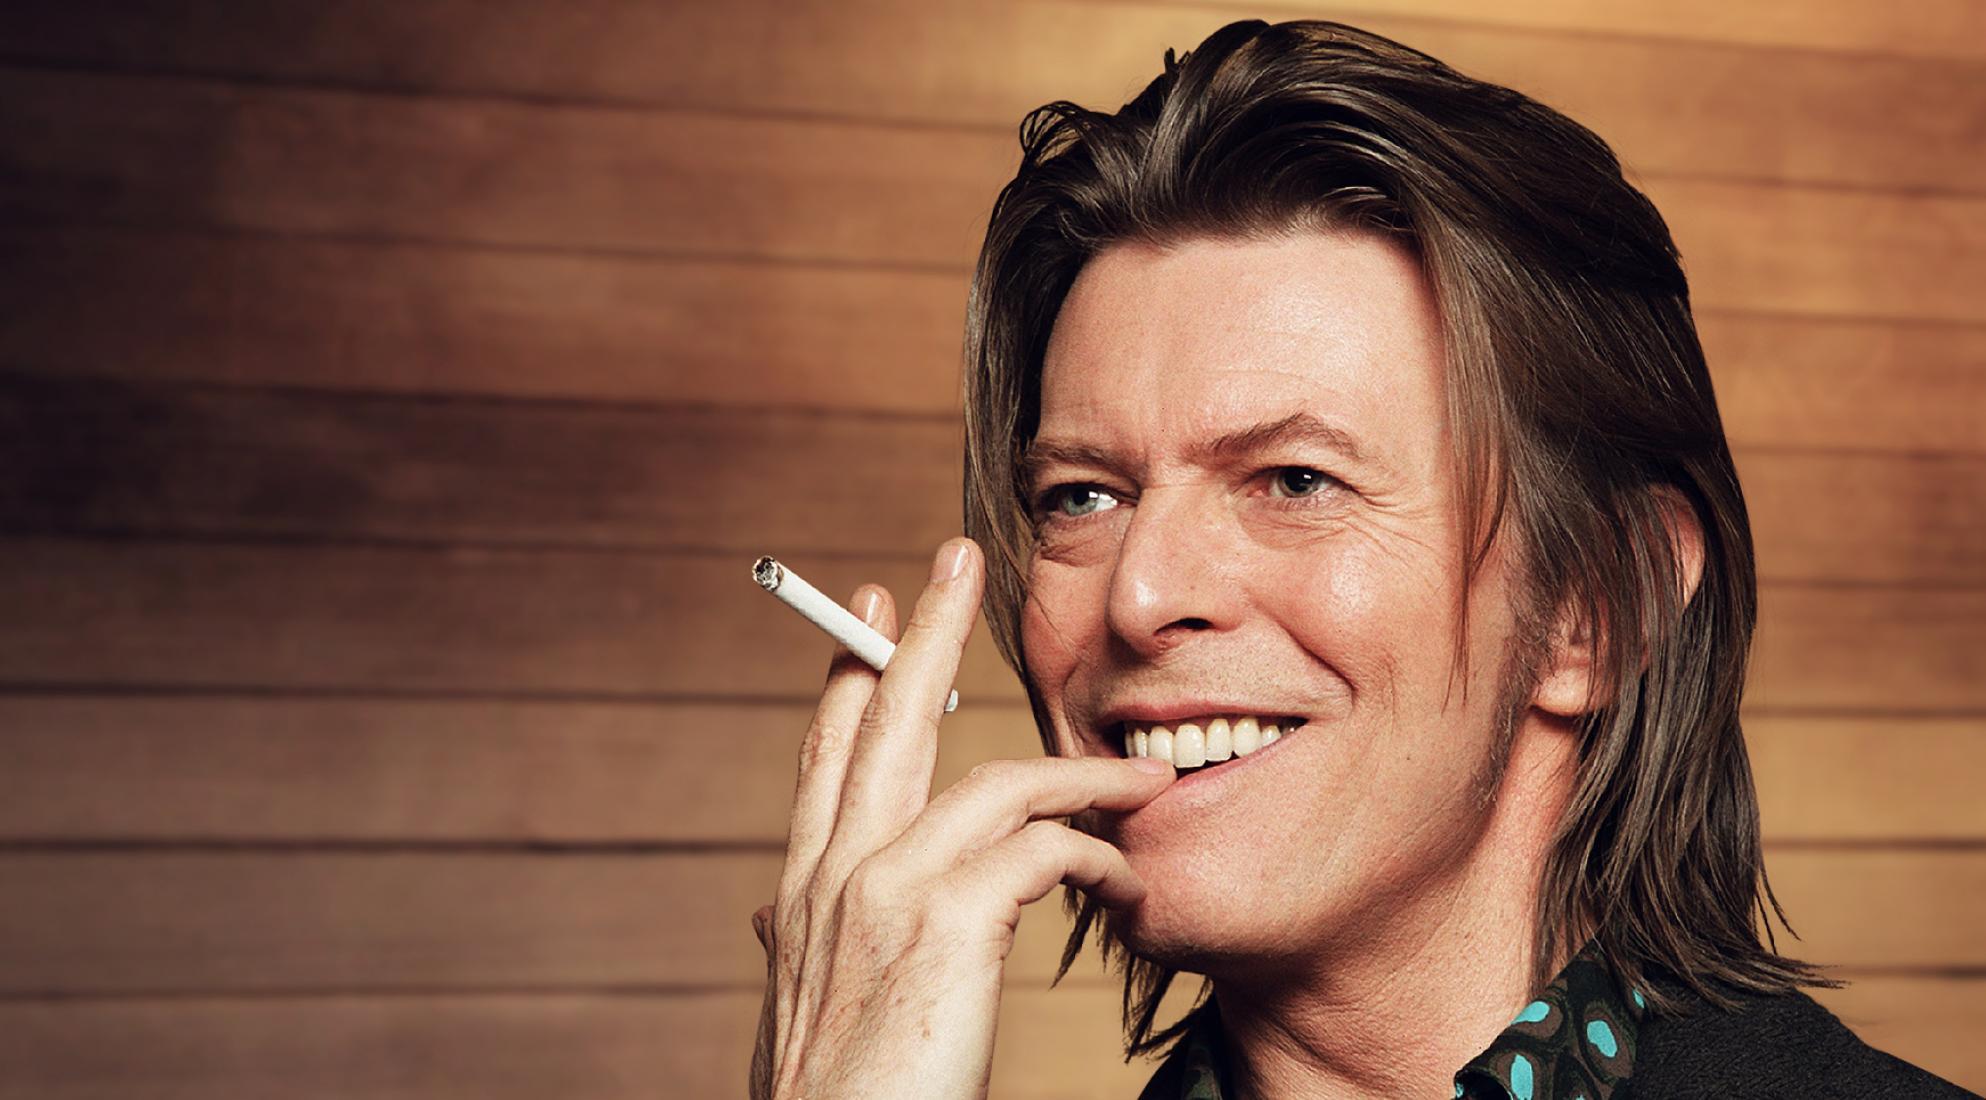 Innovation lessons from David Bowie